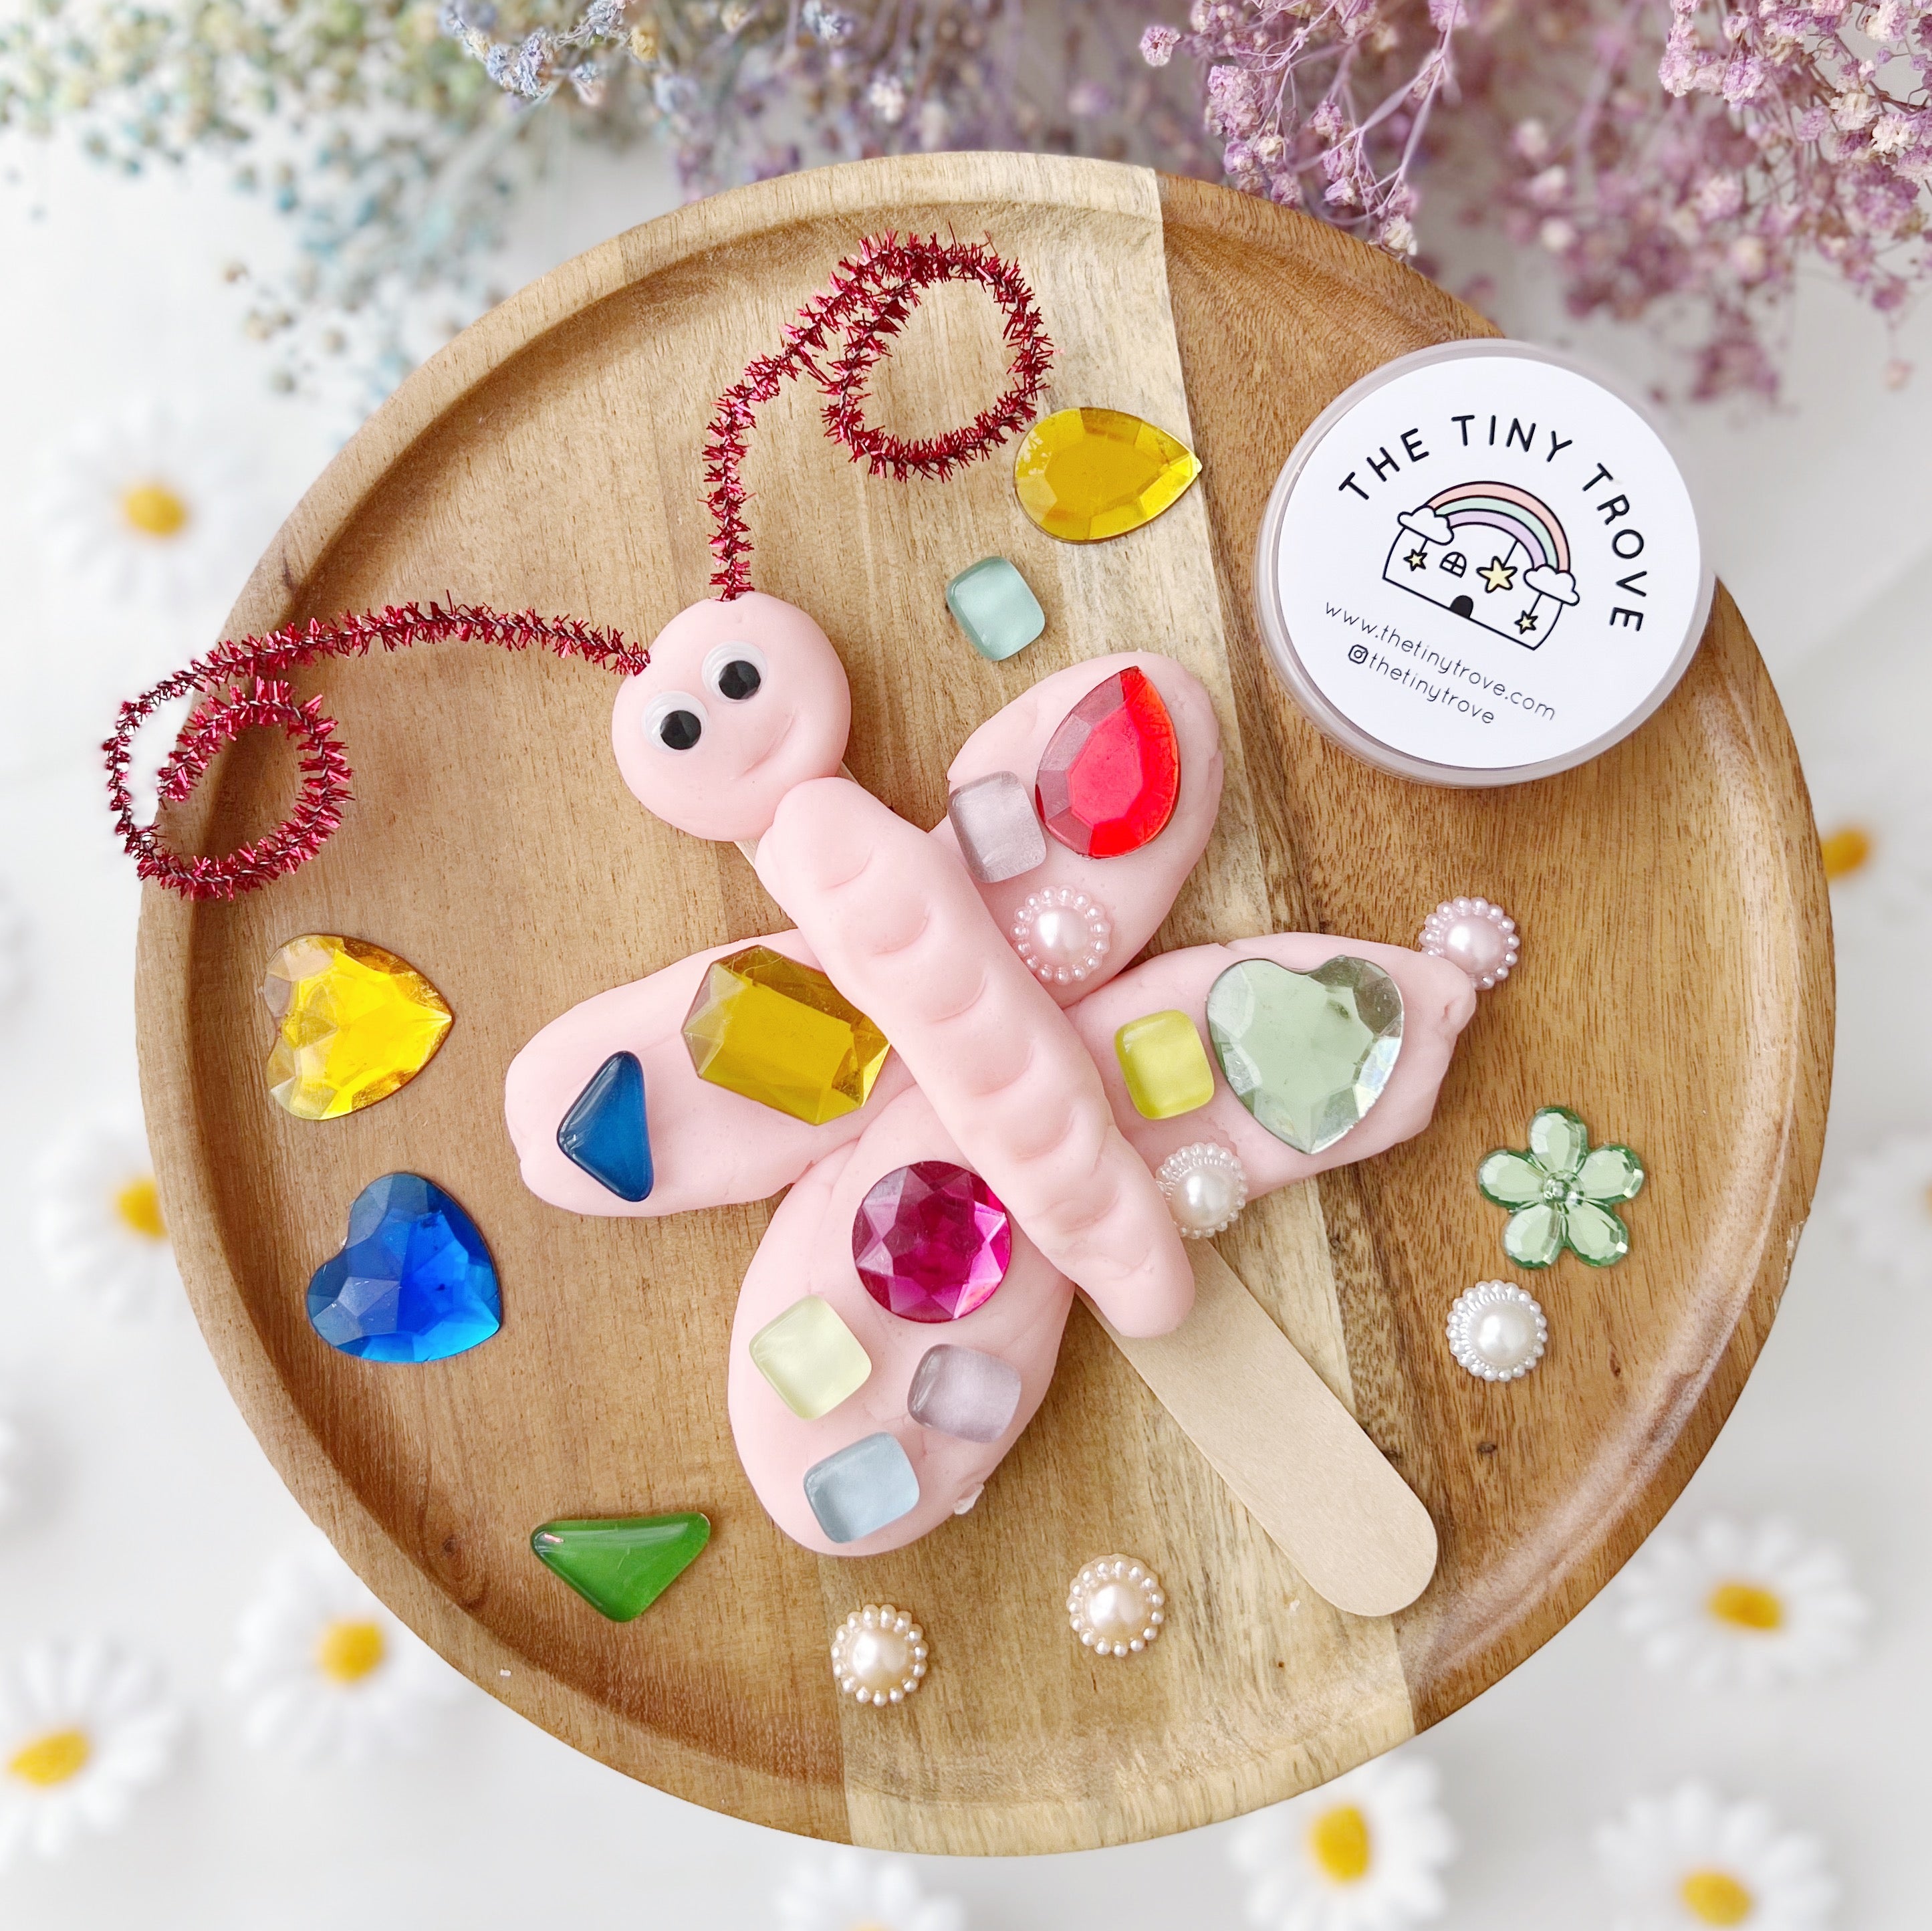 Sparkle Butterfly Play Dough Party Pack